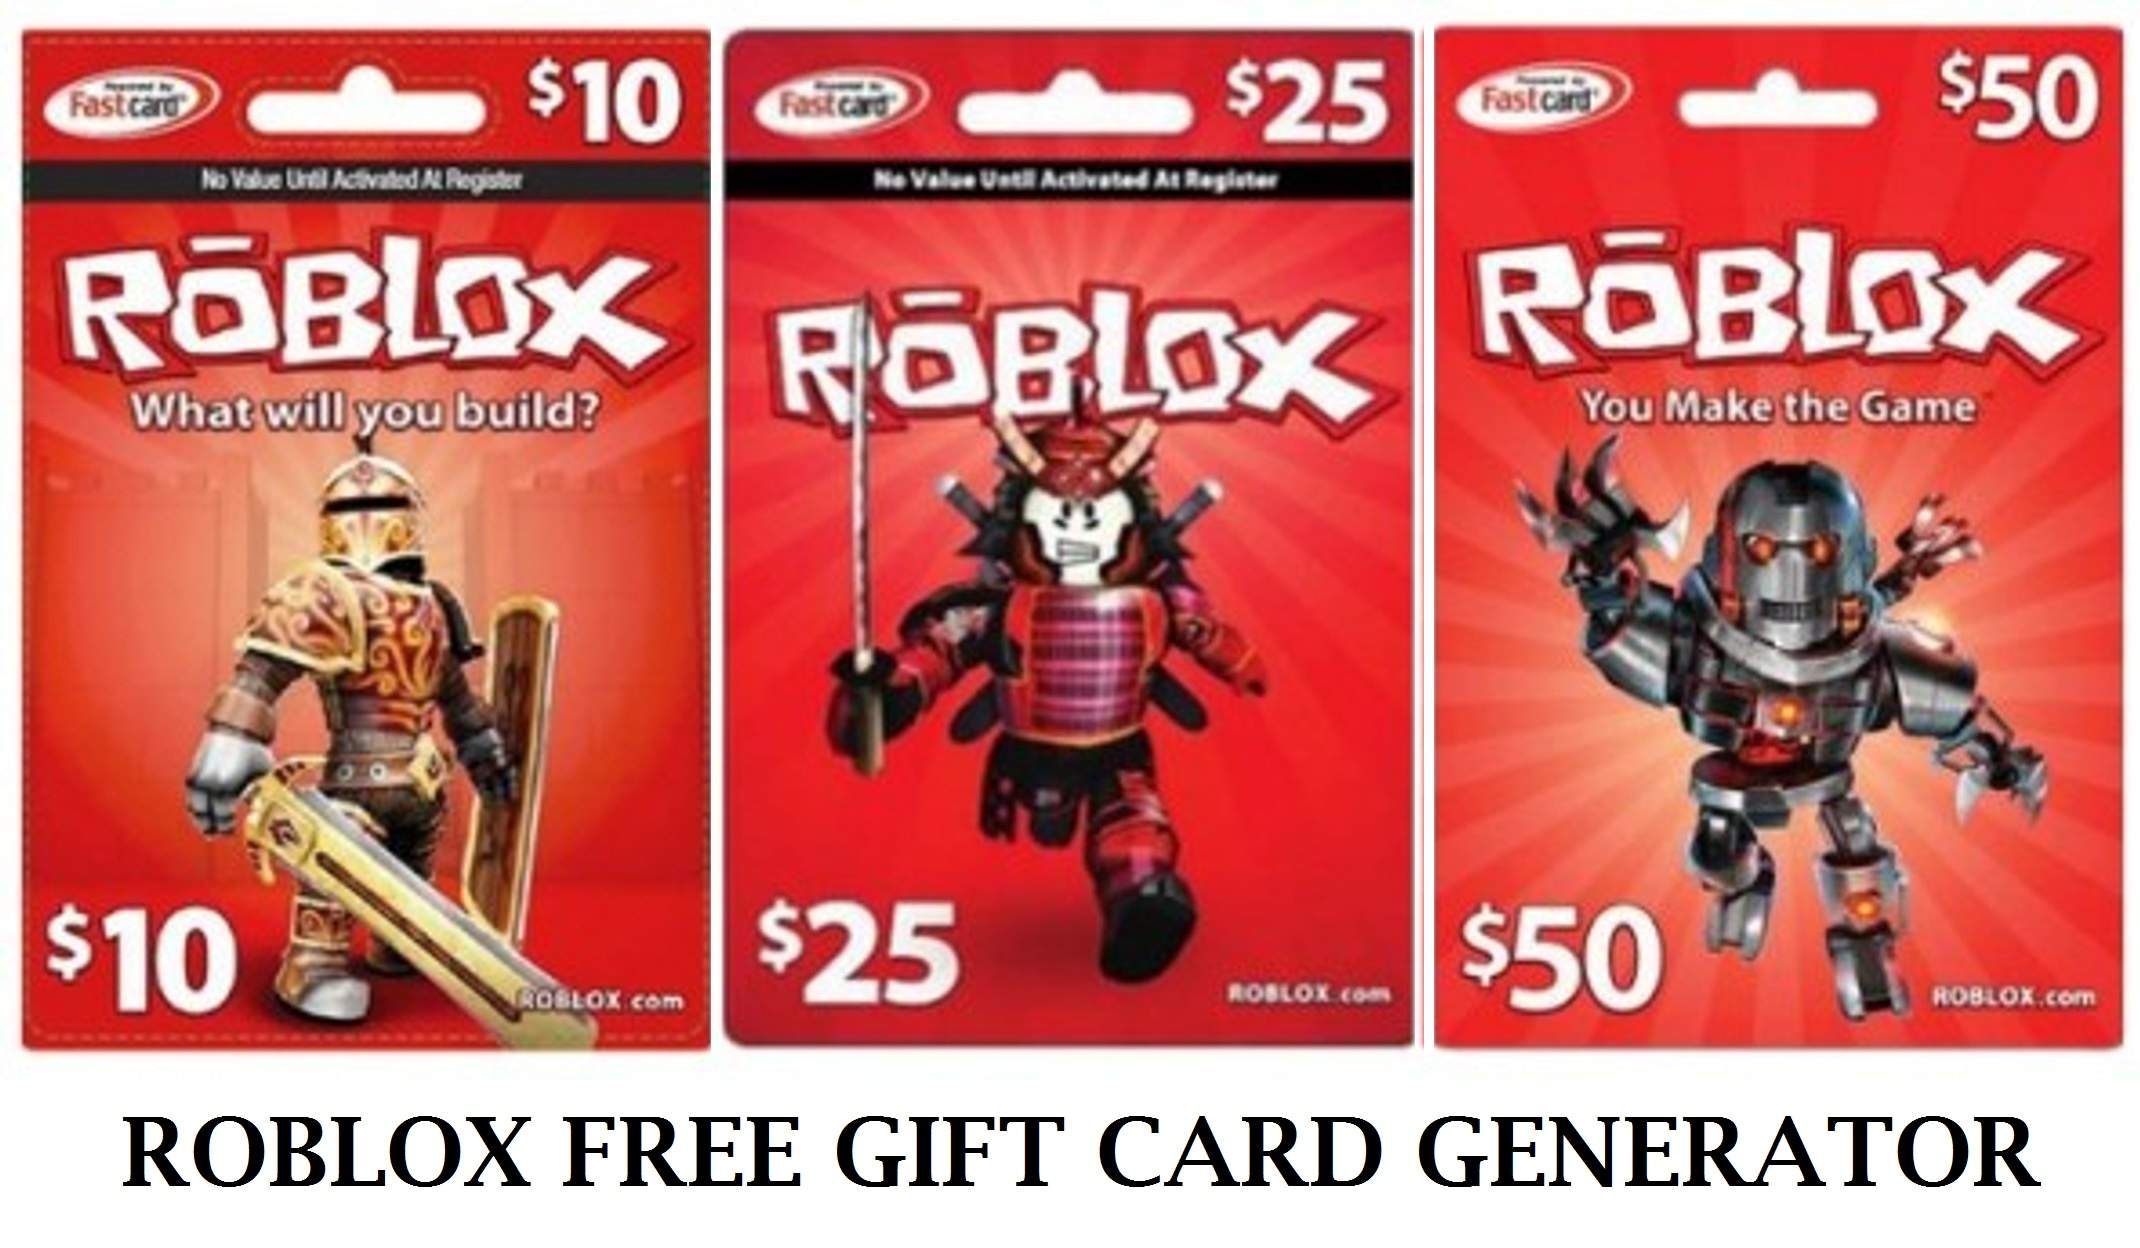 Roblox Free Gift Card Codes Generator Without Human Verification Buyfreeecoupons - error code 772 roblox robux gift card giveaway